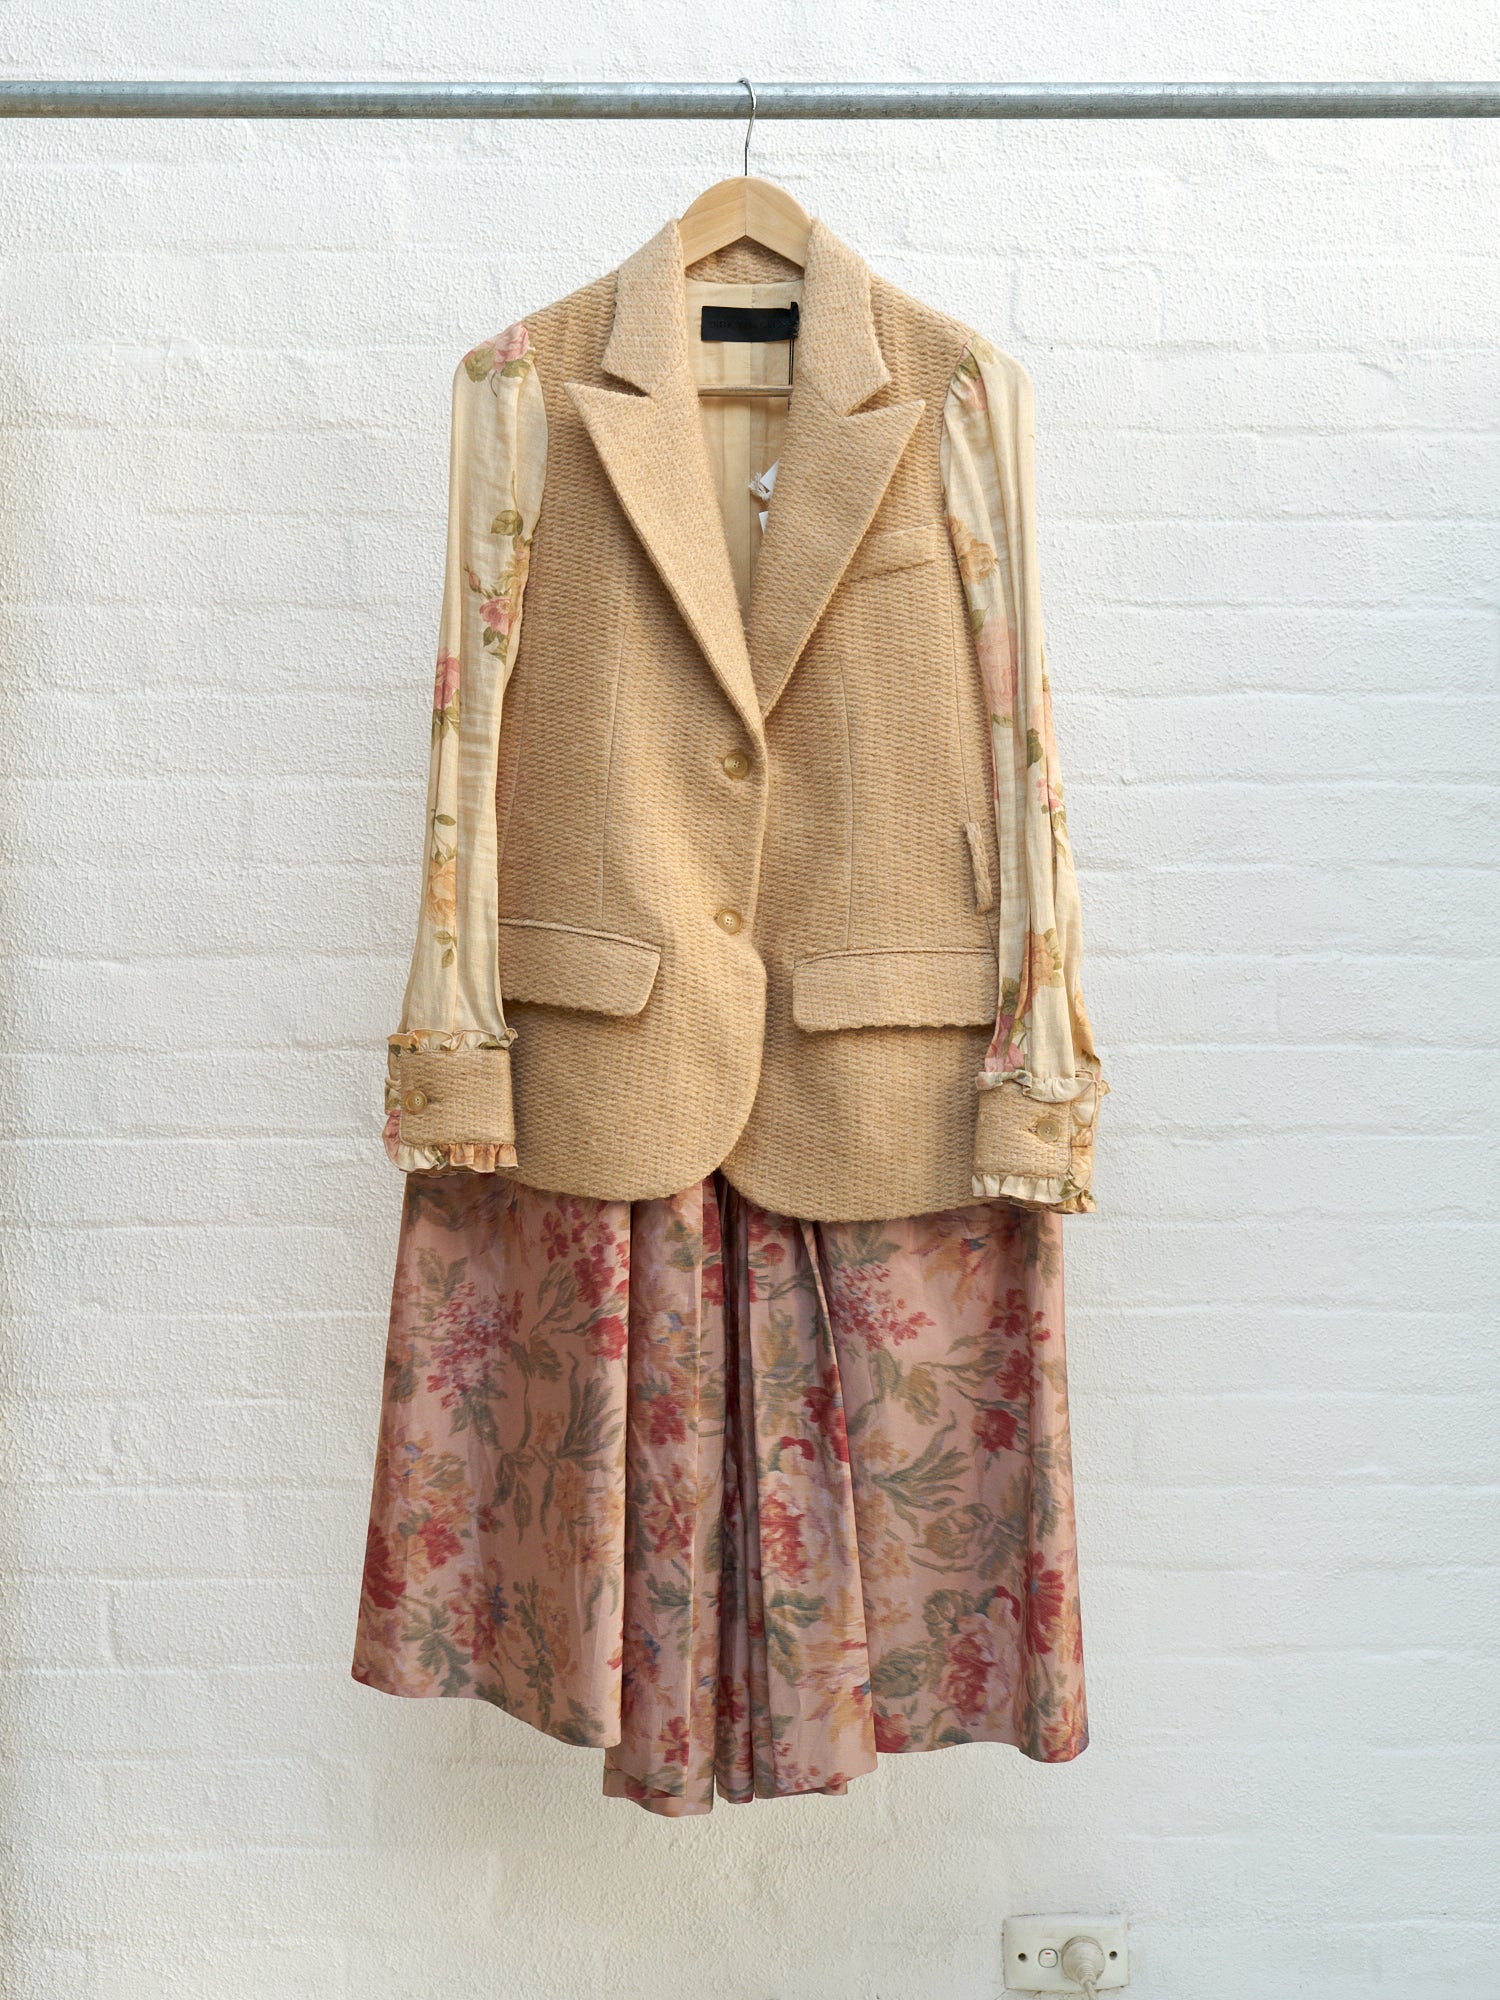 Dirk van saene AW2001 beige layered multi-floral pullover coat dress - size 38 S